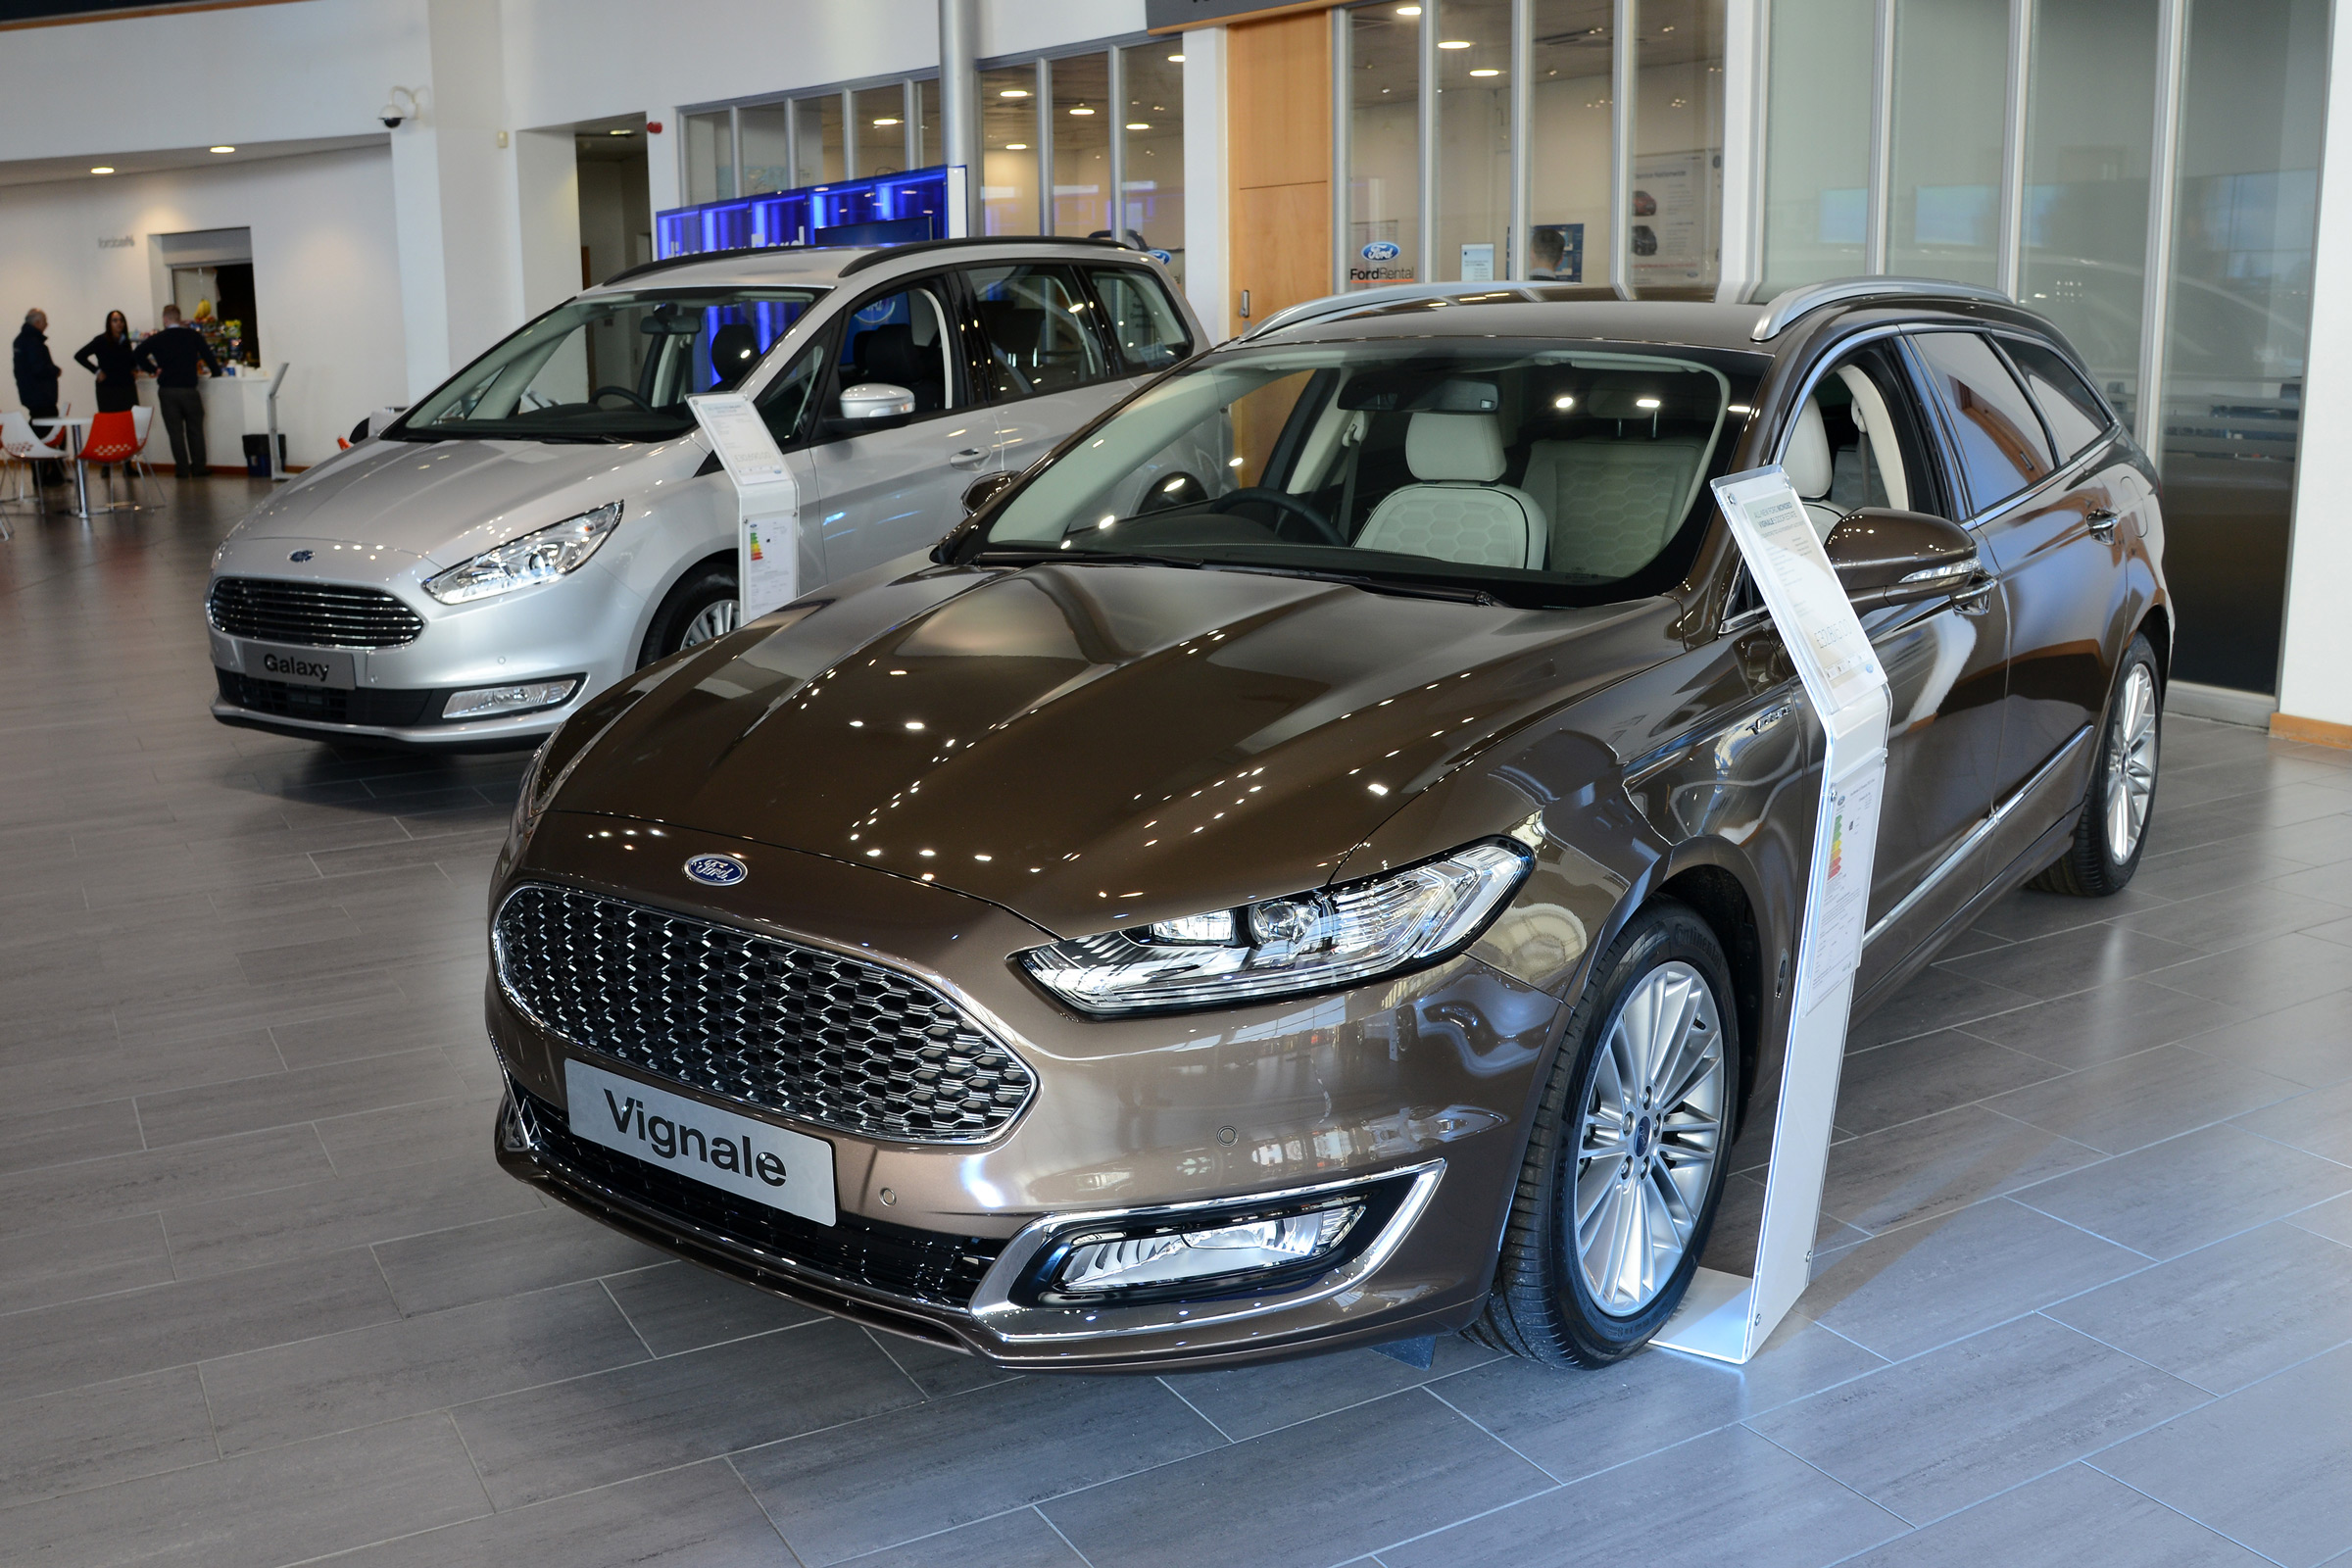 Ford plans to sell cars online in the UK | Auto Express